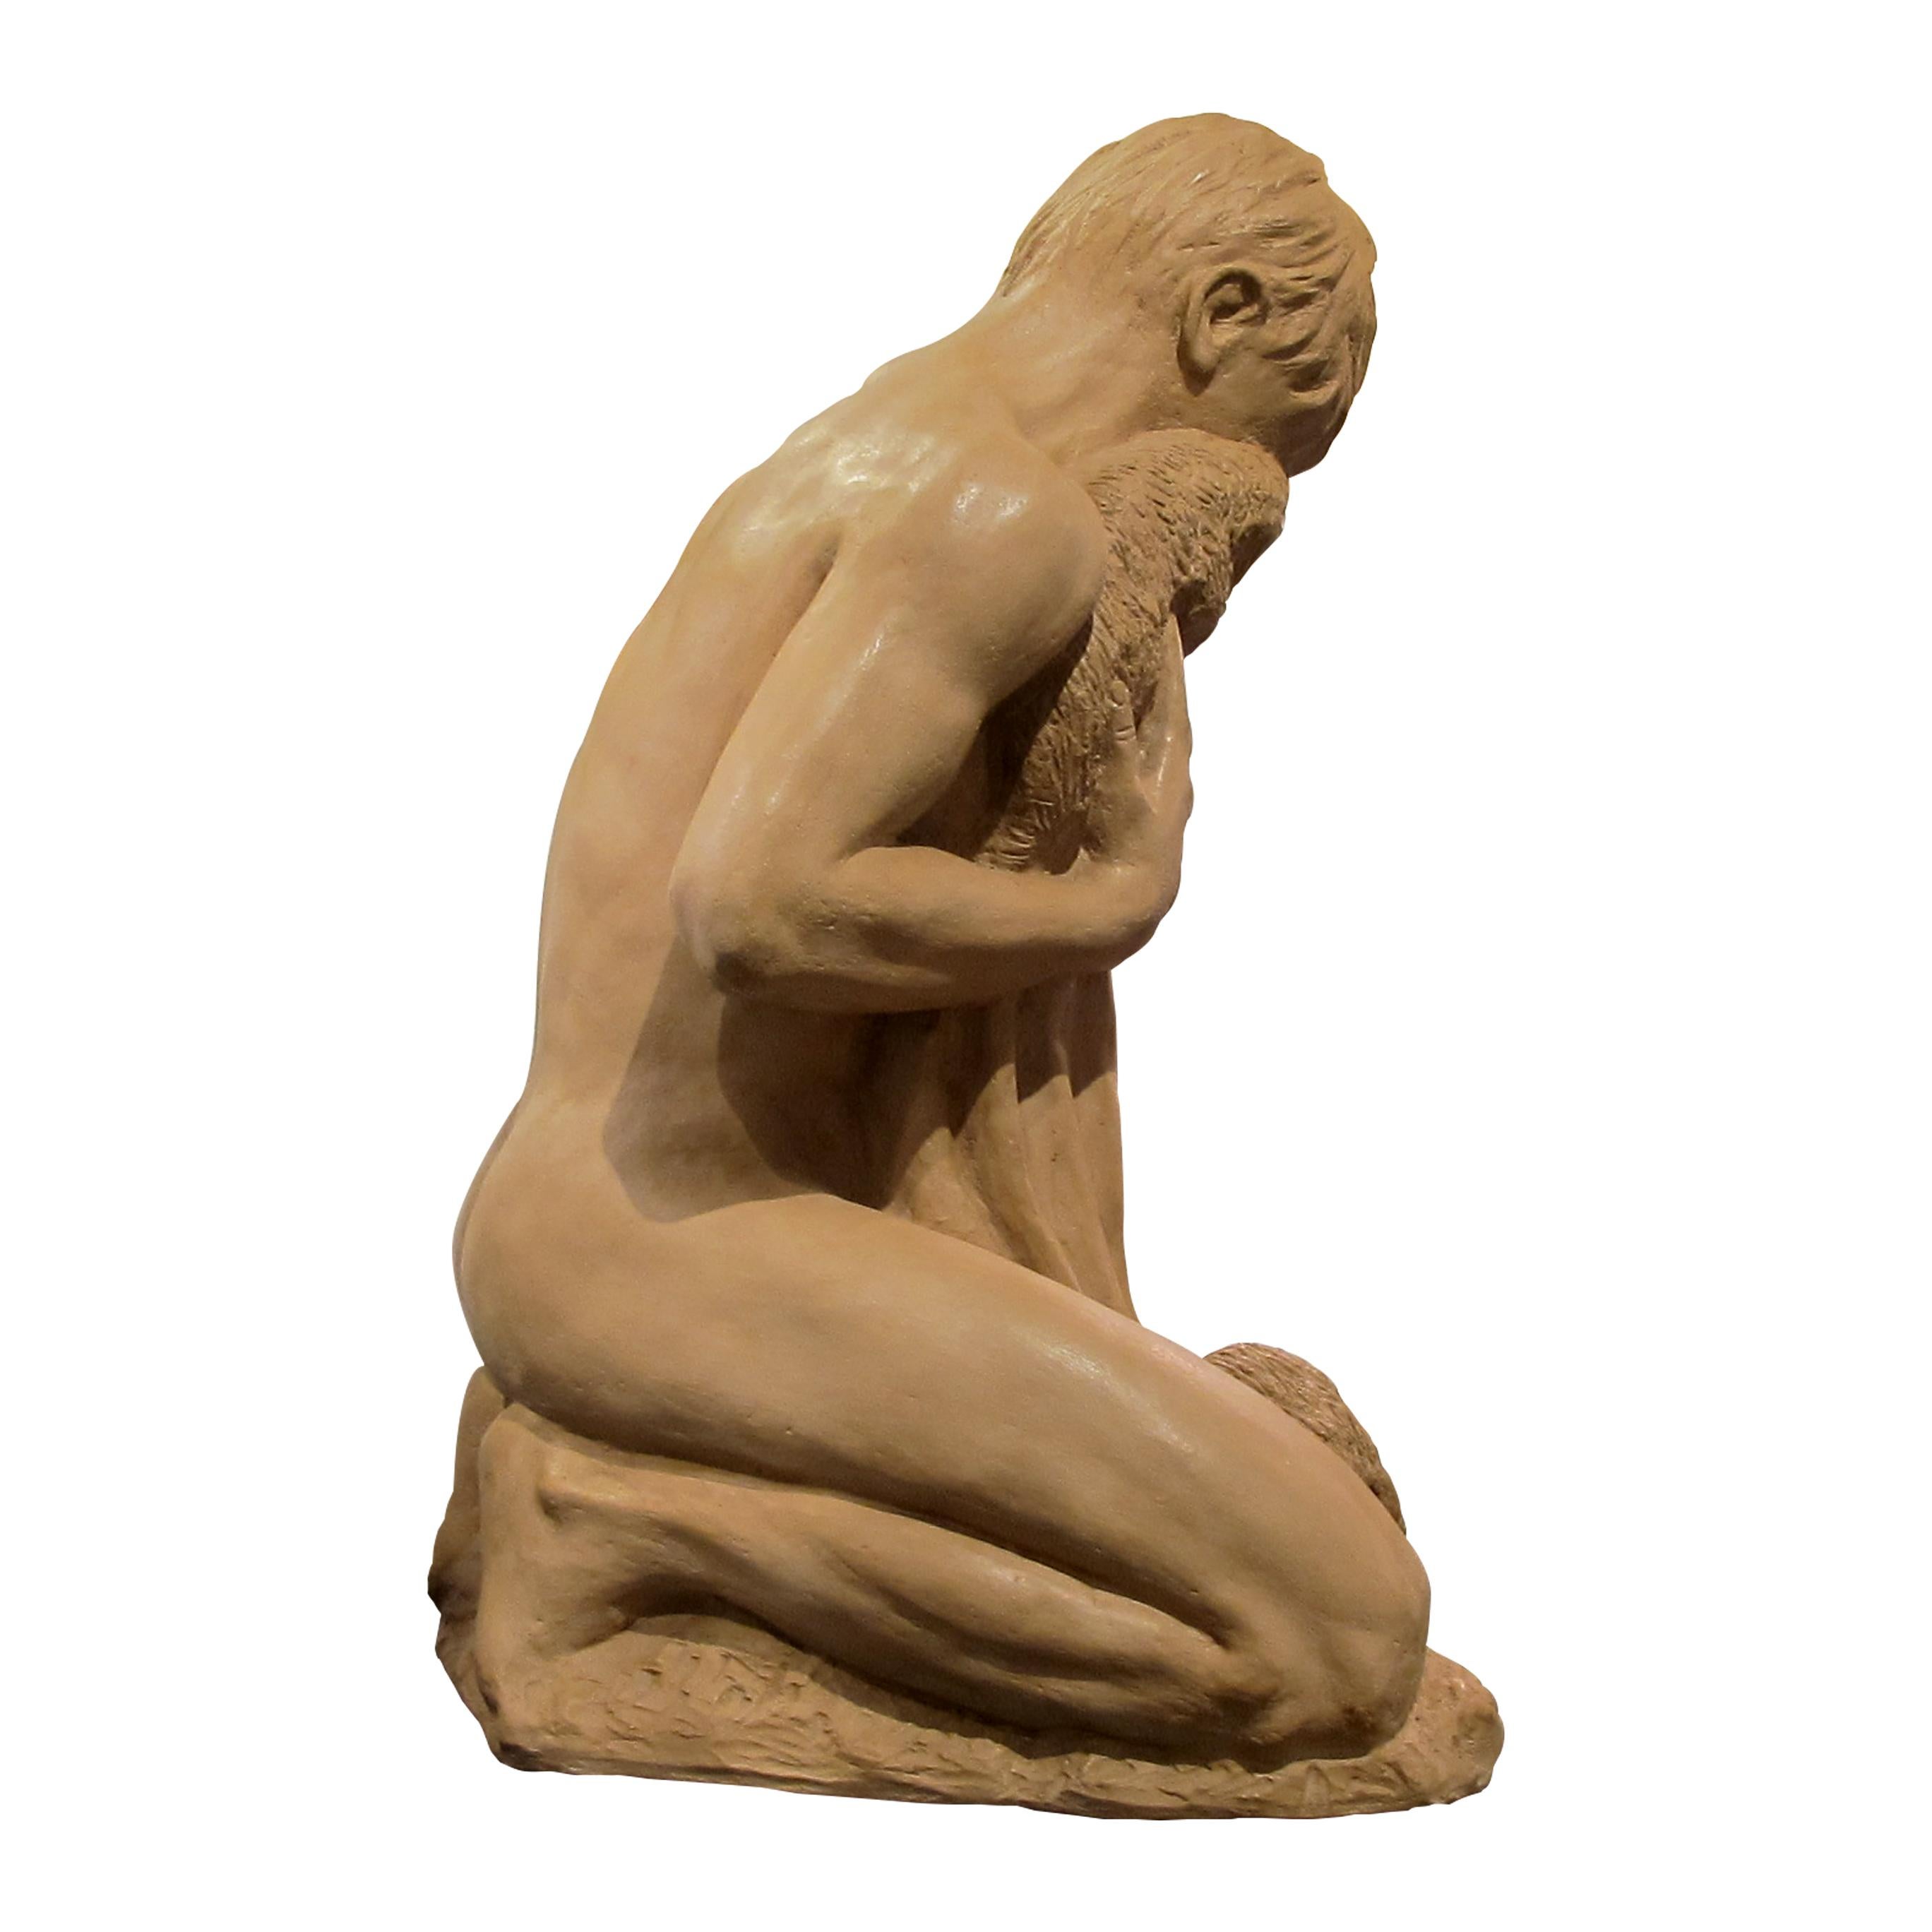 1950s French Terracotta Sculpture Of A Man Kneeling In Good Condition For Sale In London, GB